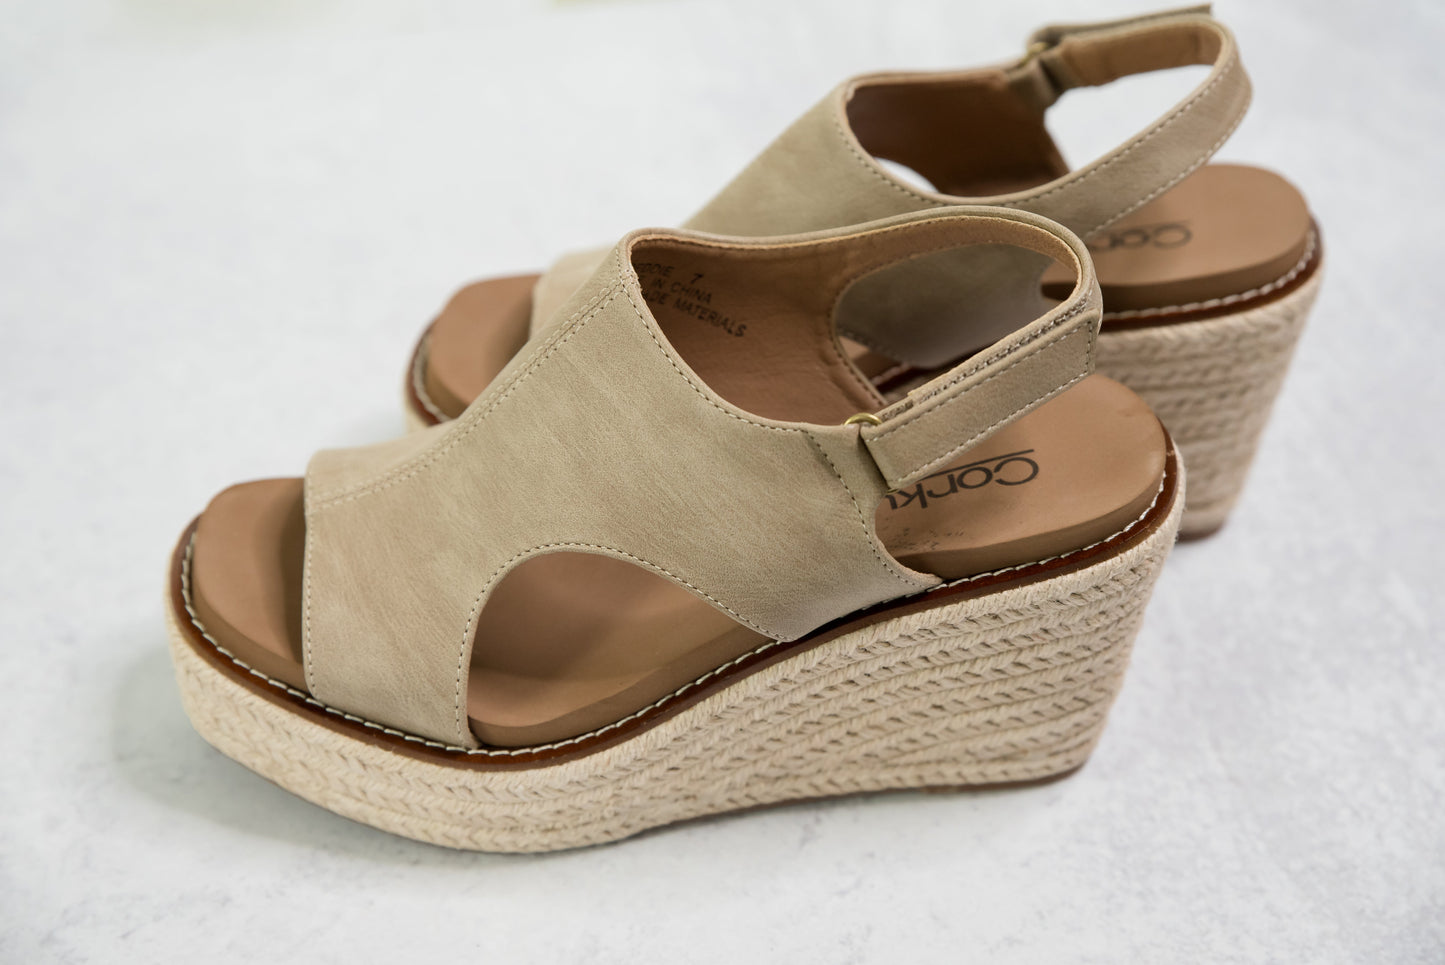 Corky’s Freddie Wedges in Taupe